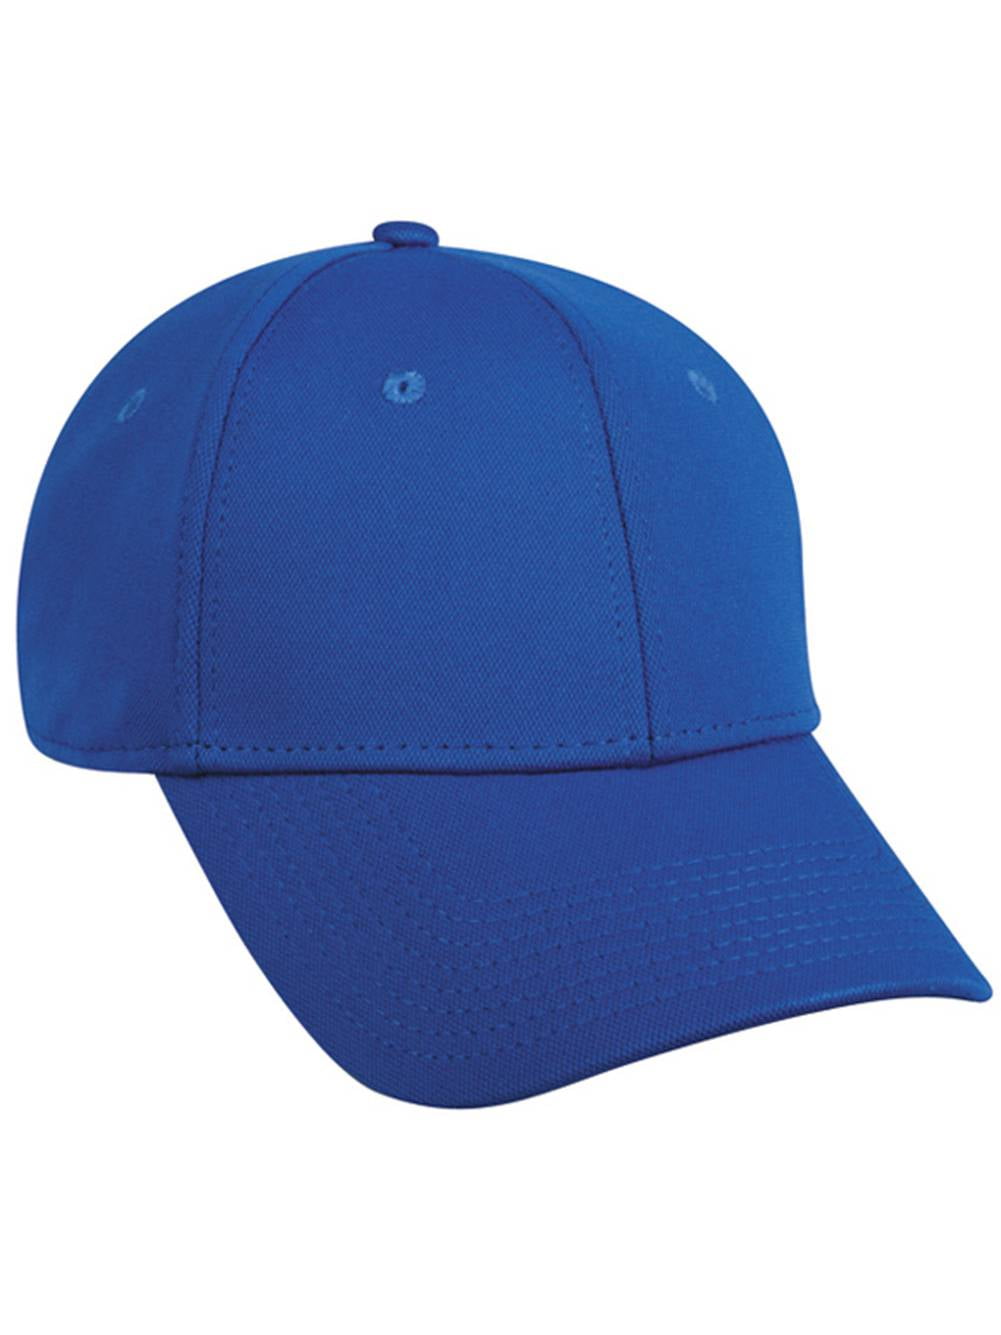 Blue Royal Fit All Hat Flex Fitted Large, Large- X